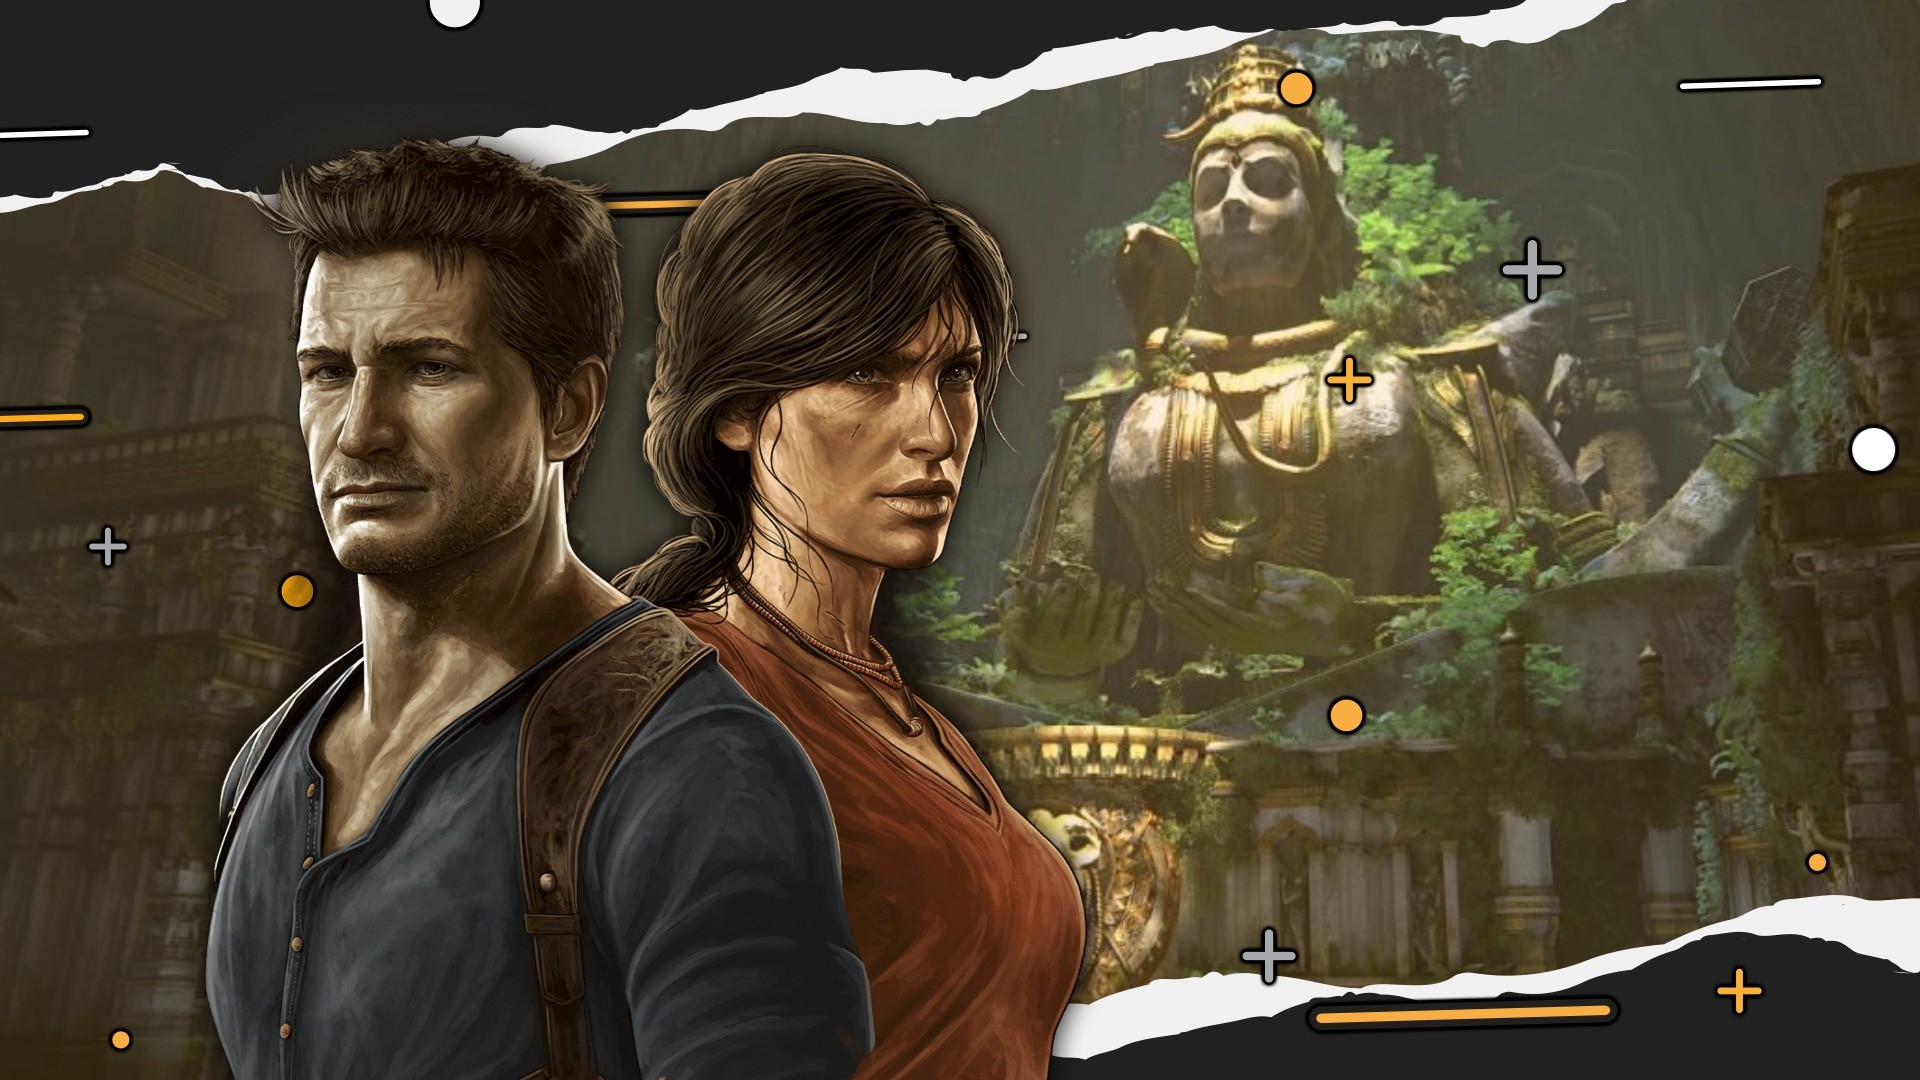 Uncharted legacy of thieves прохождение. Анчартед Legacy of Thieves. Uncharted: Legacy of Thieves collection. Uncharted 4 Legacy of Thieves collection. Uncharted наследие воров.